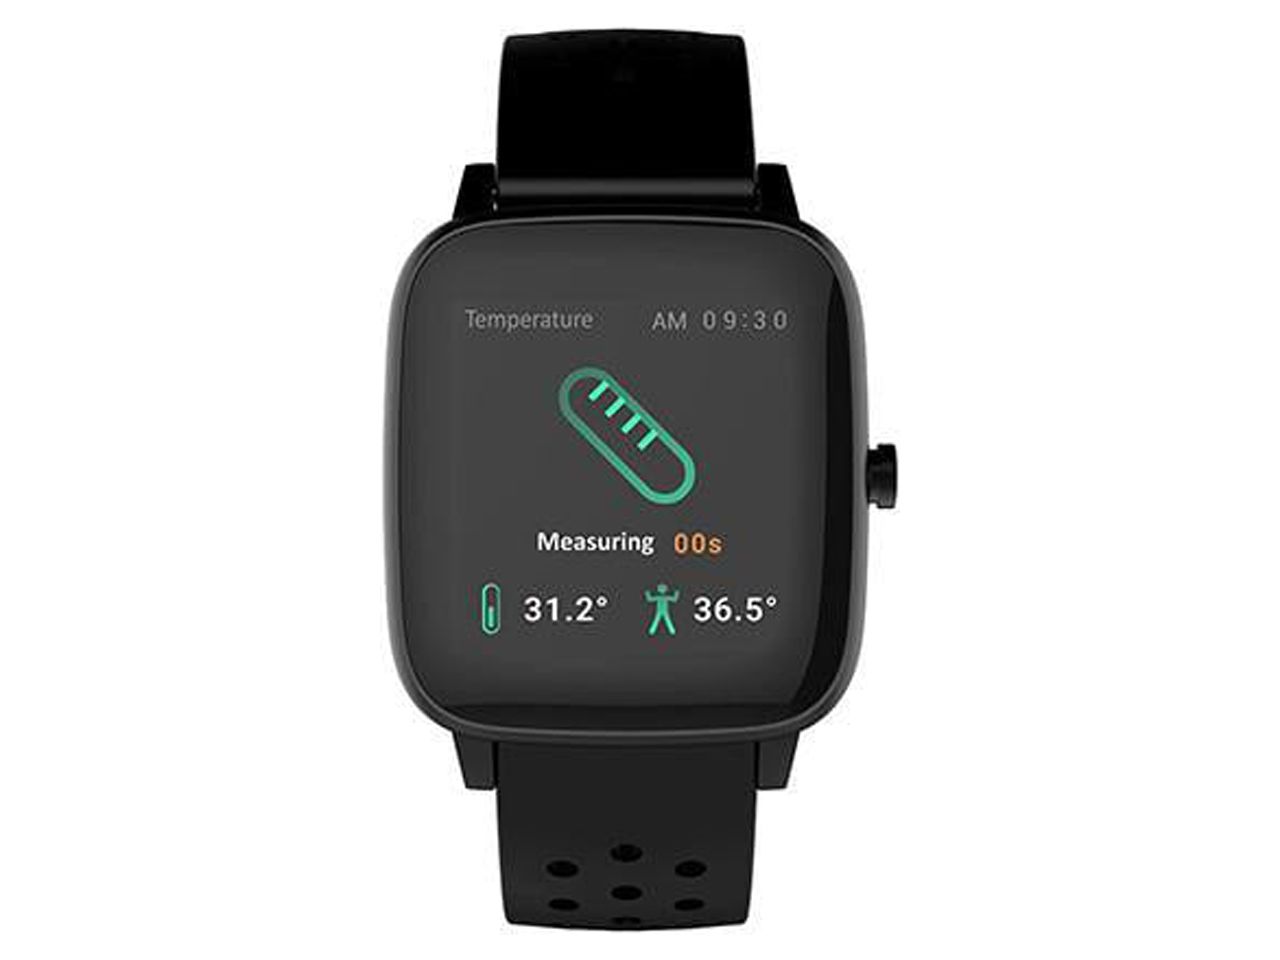 Supersonic 1.4” Touch Screen Smartwatch with Body Temperature Monitor Unisex New - Black - image 2 of 4